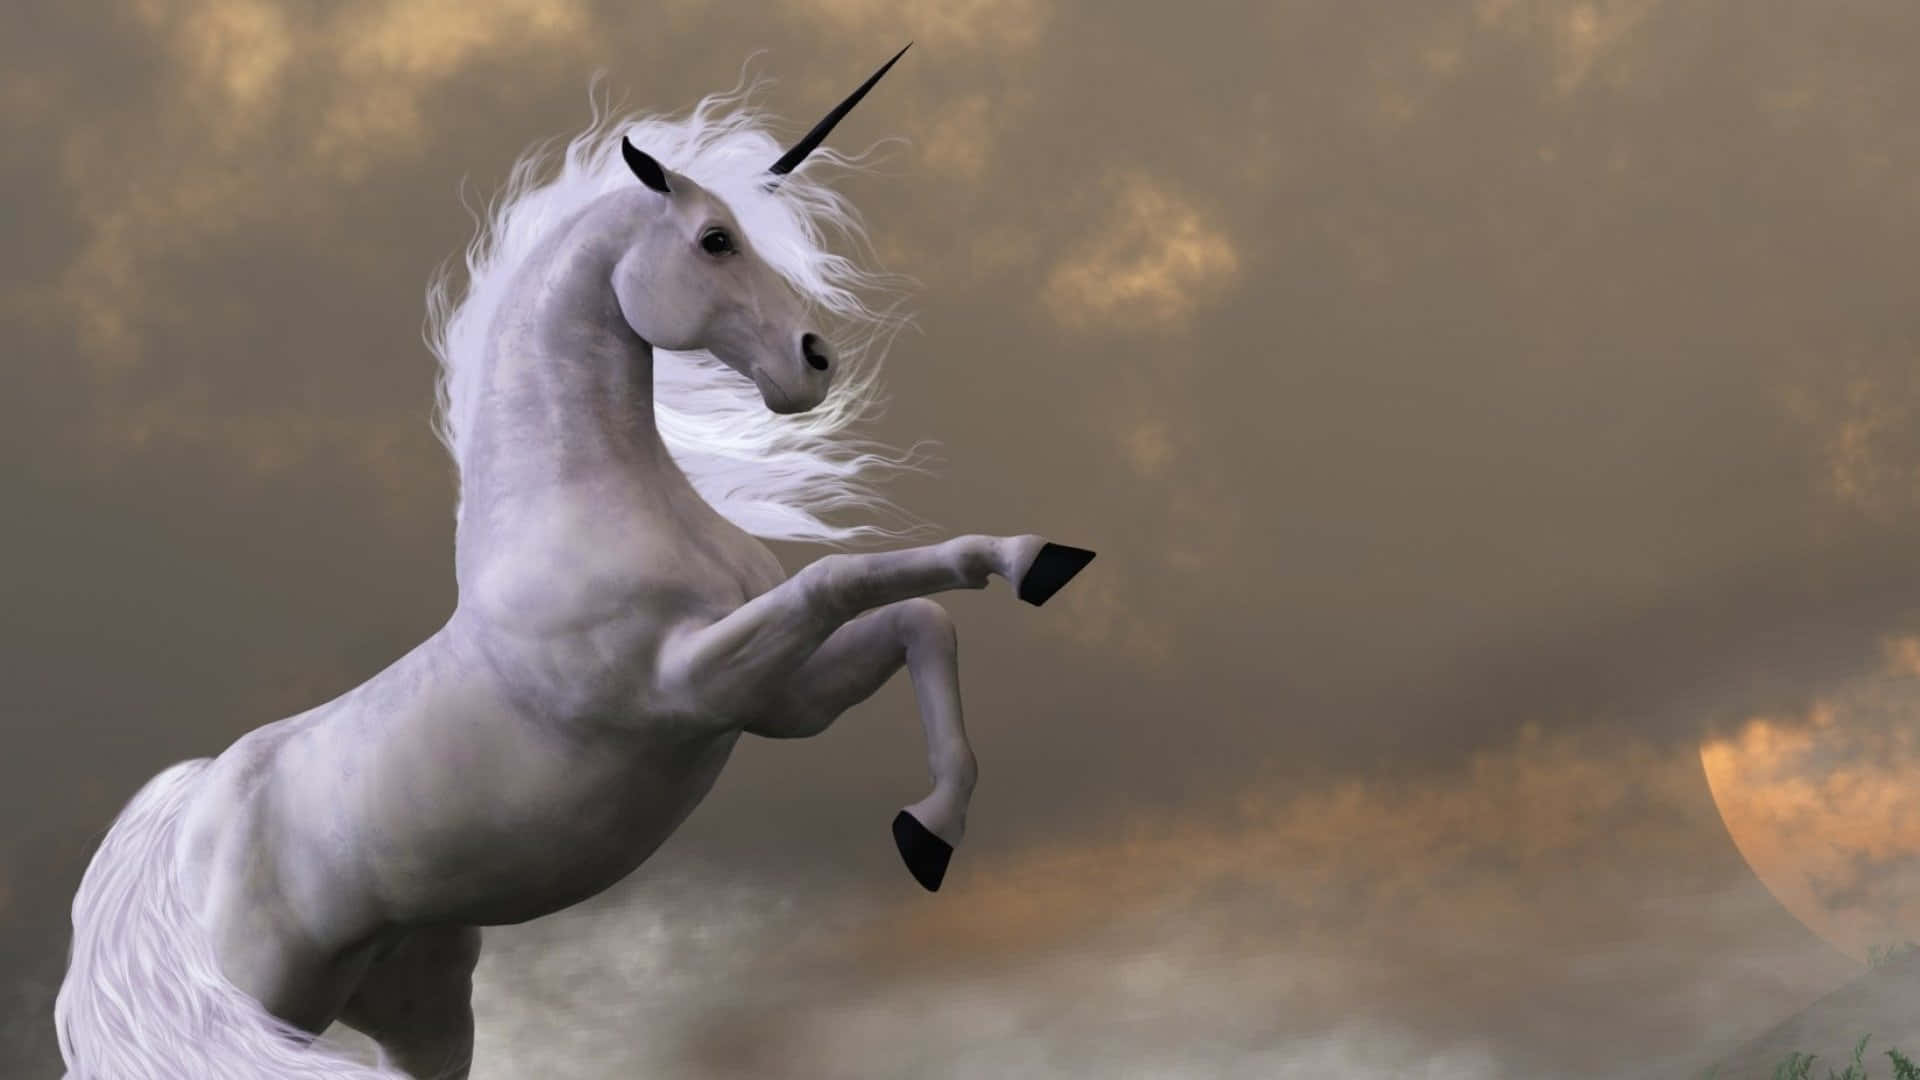 Unicorn Under A Stormy Sky Picture